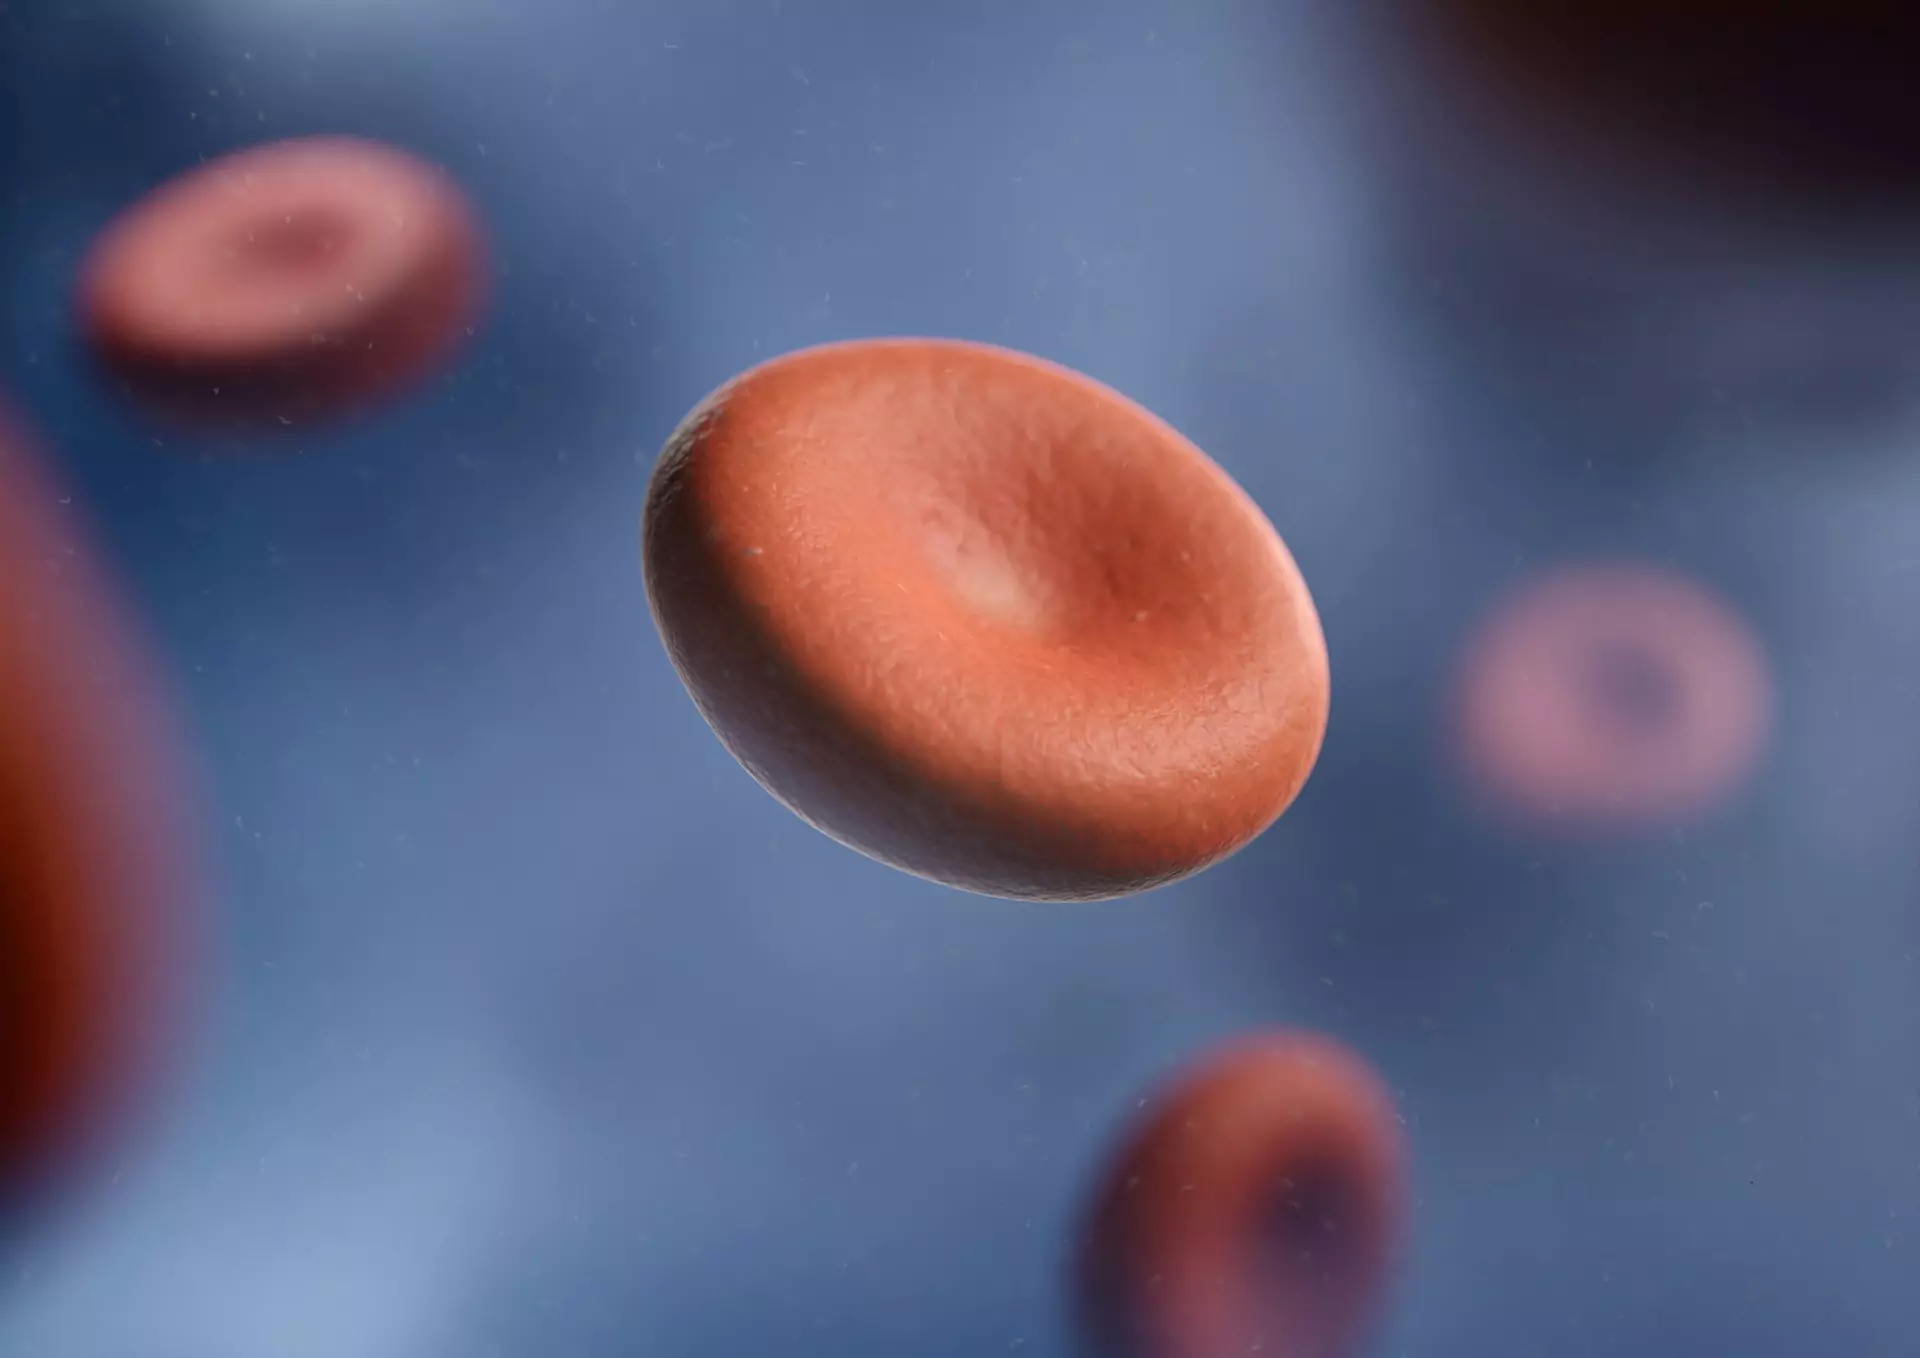 Red blood cells flowing through a blood vessel, transporting oxygen and nutrients throughout the body.